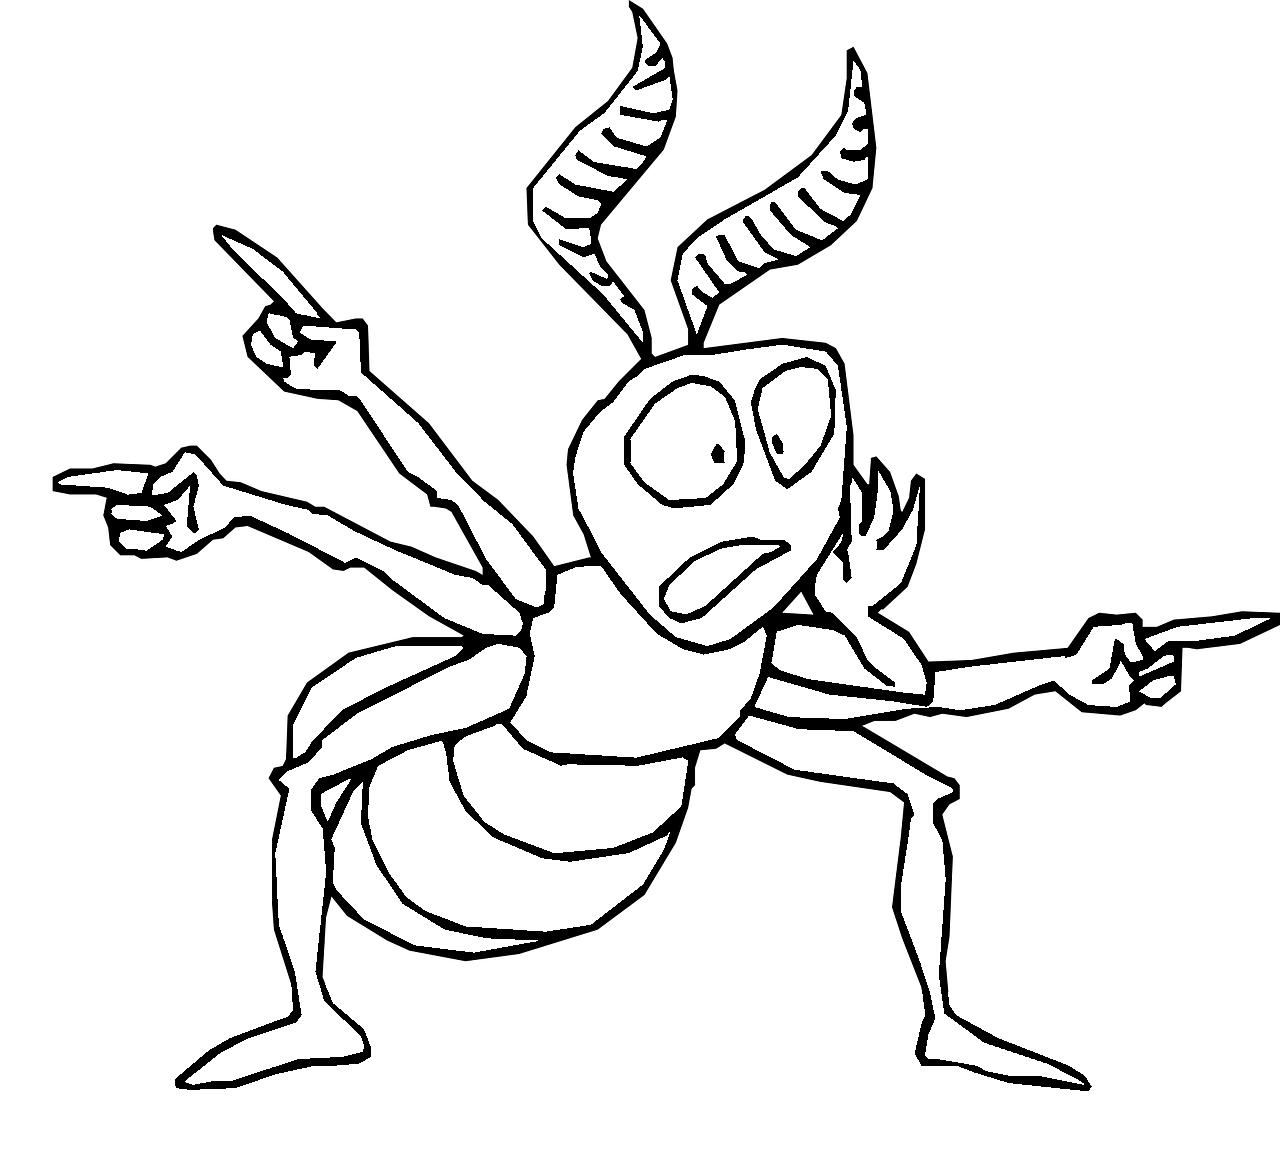 Ant coloring page cartoon style